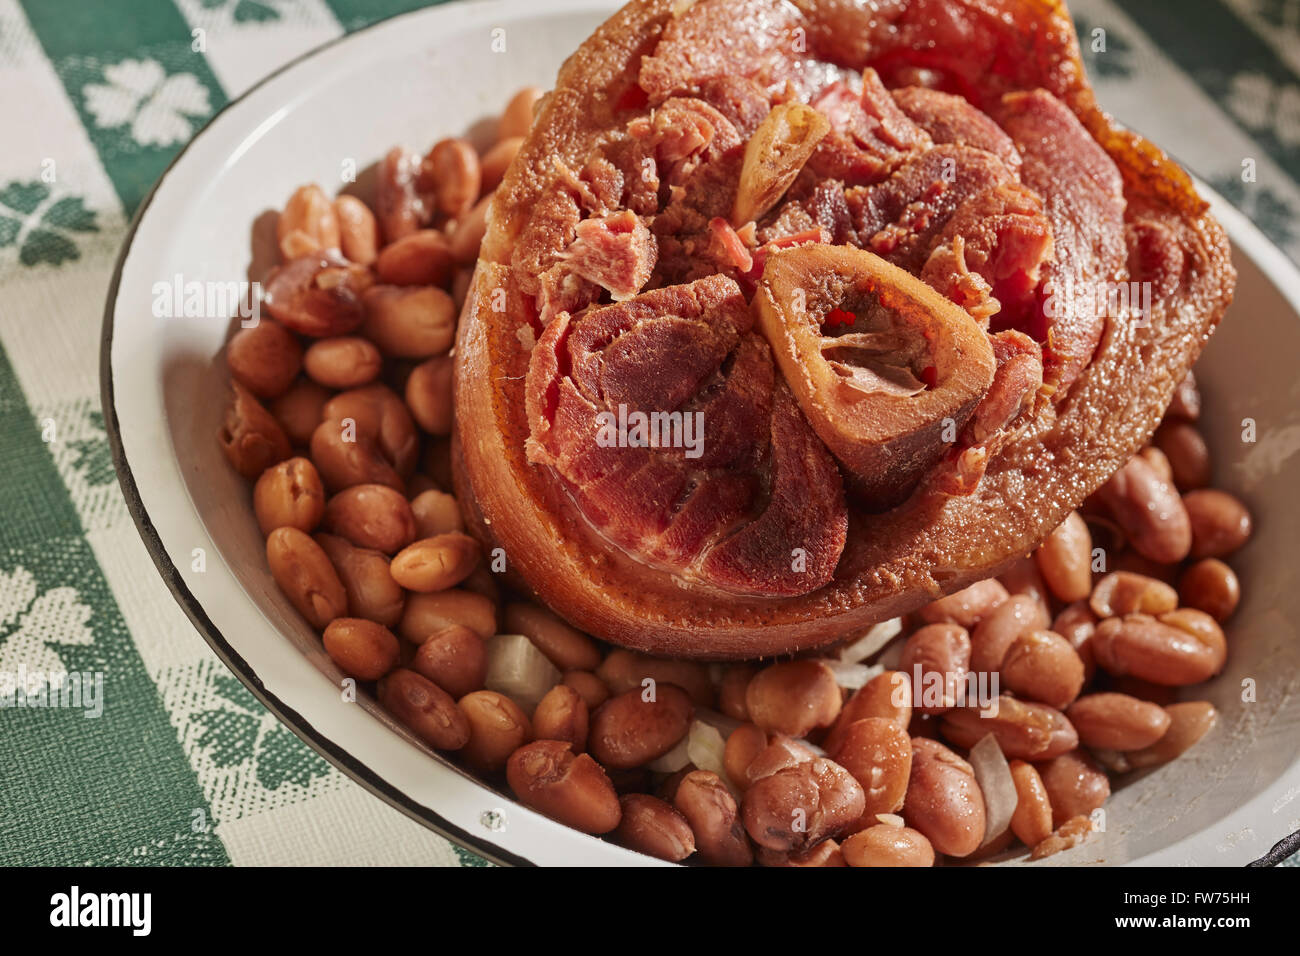 A Cooked Ham Hock With Pinto Beans Called Soup Beans In Stock Photo Alamy